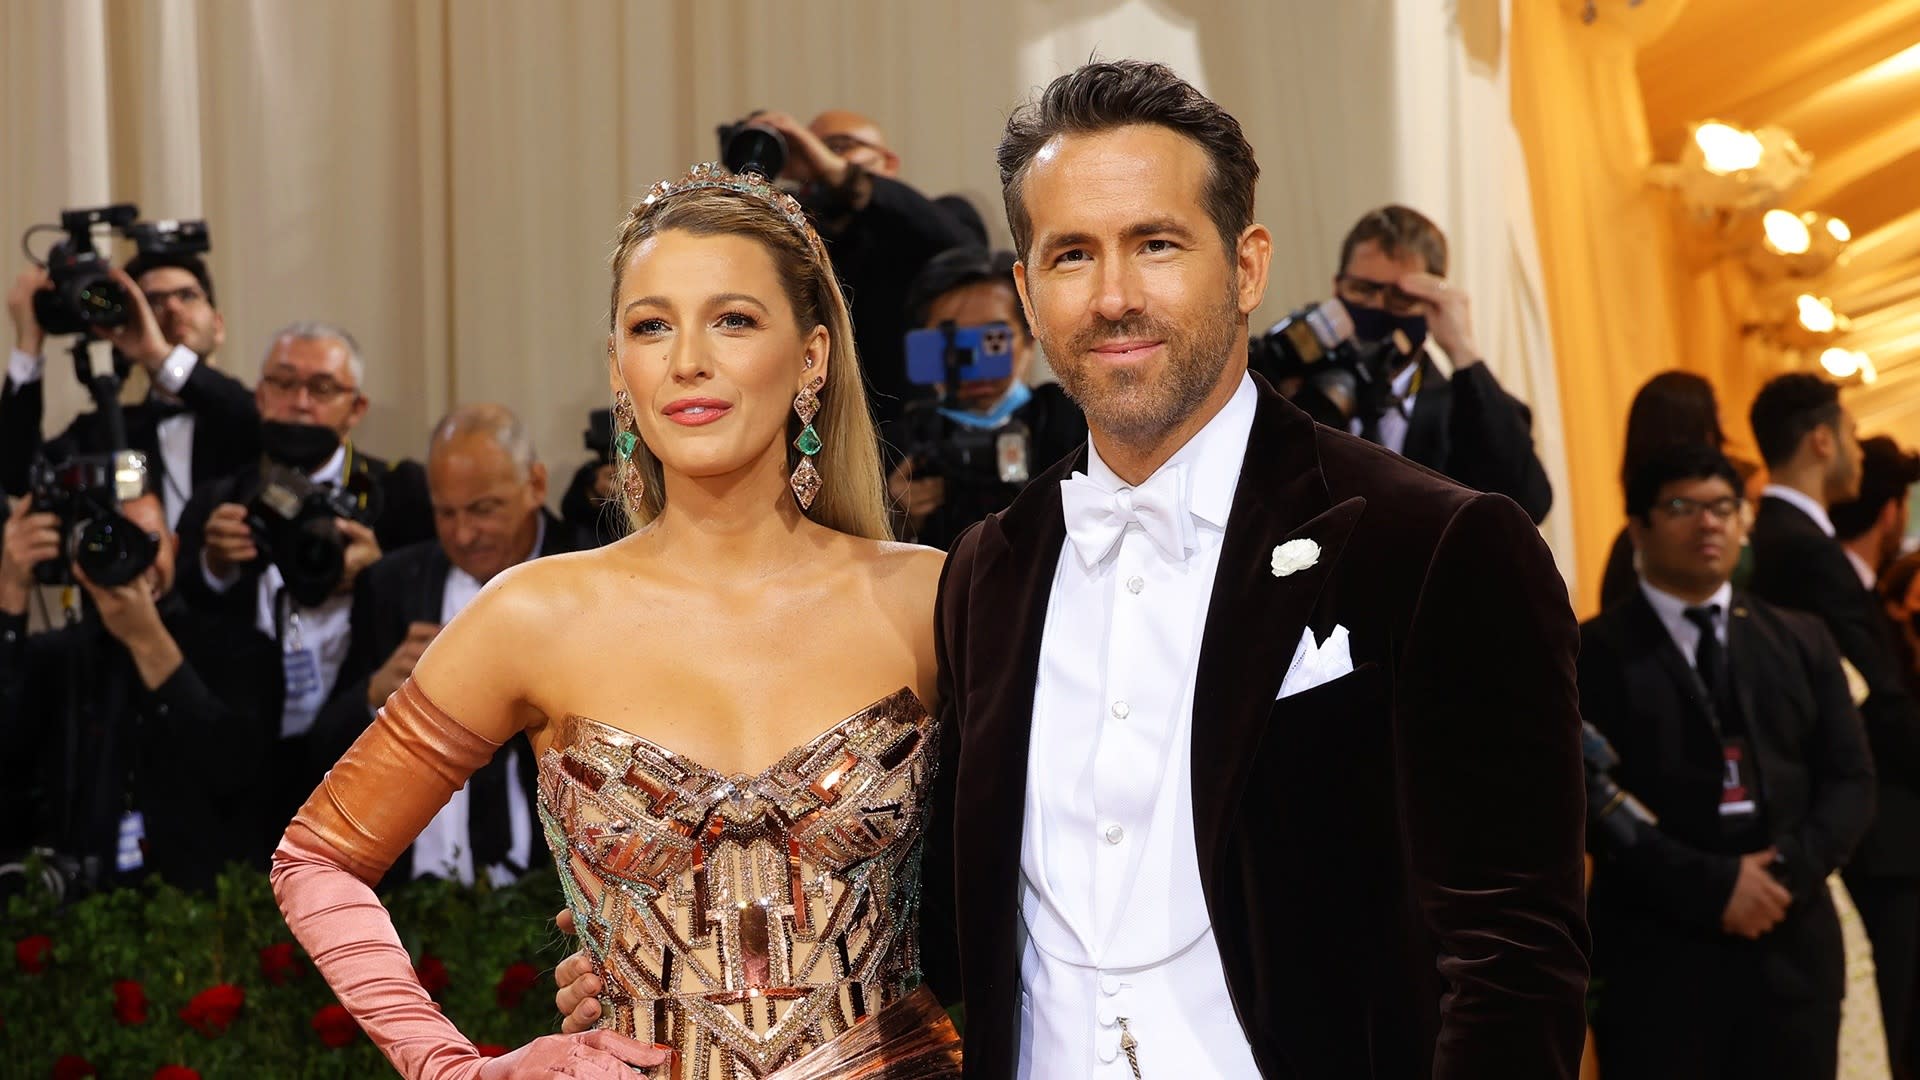 No Blake Lively at Met Gala 2023, but her selfie stole the show